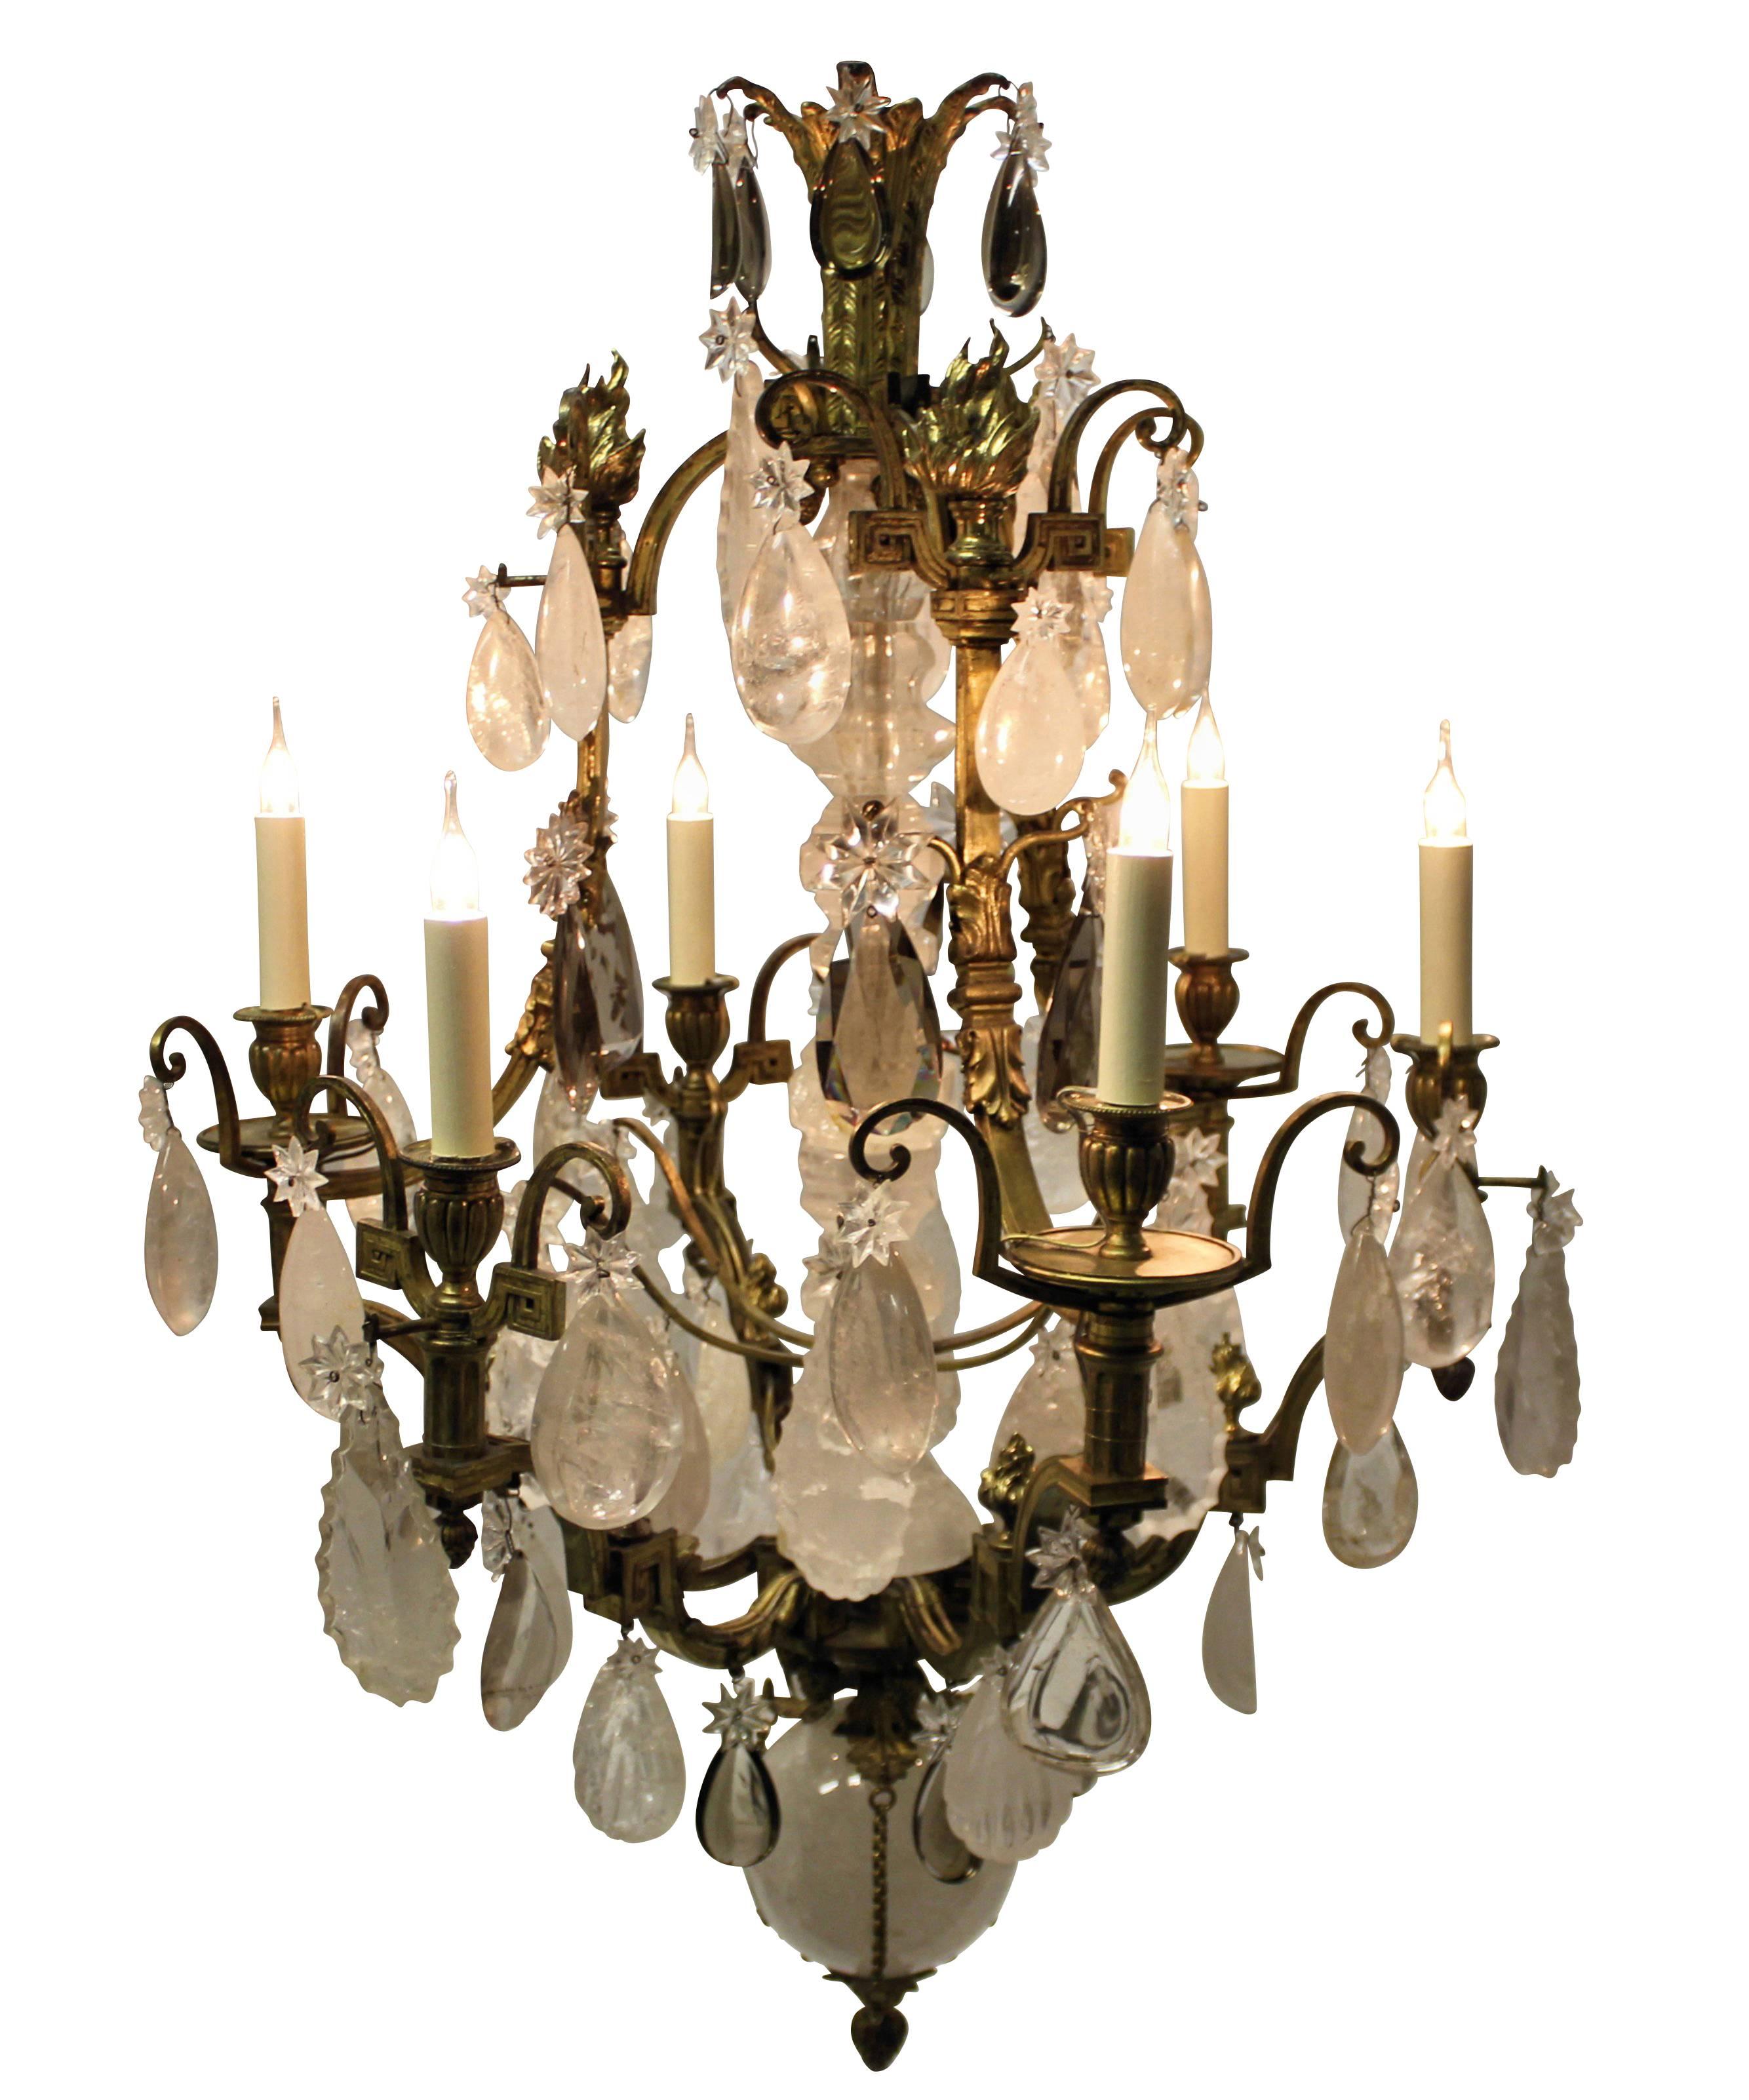 A fine Russian neoclassical gilt bronze and rock crystal chandelier with smoked quartz drops. Made in France for the Russian market.

The ball has a diameter of 18 cm and the largest plaque is 18 cm.